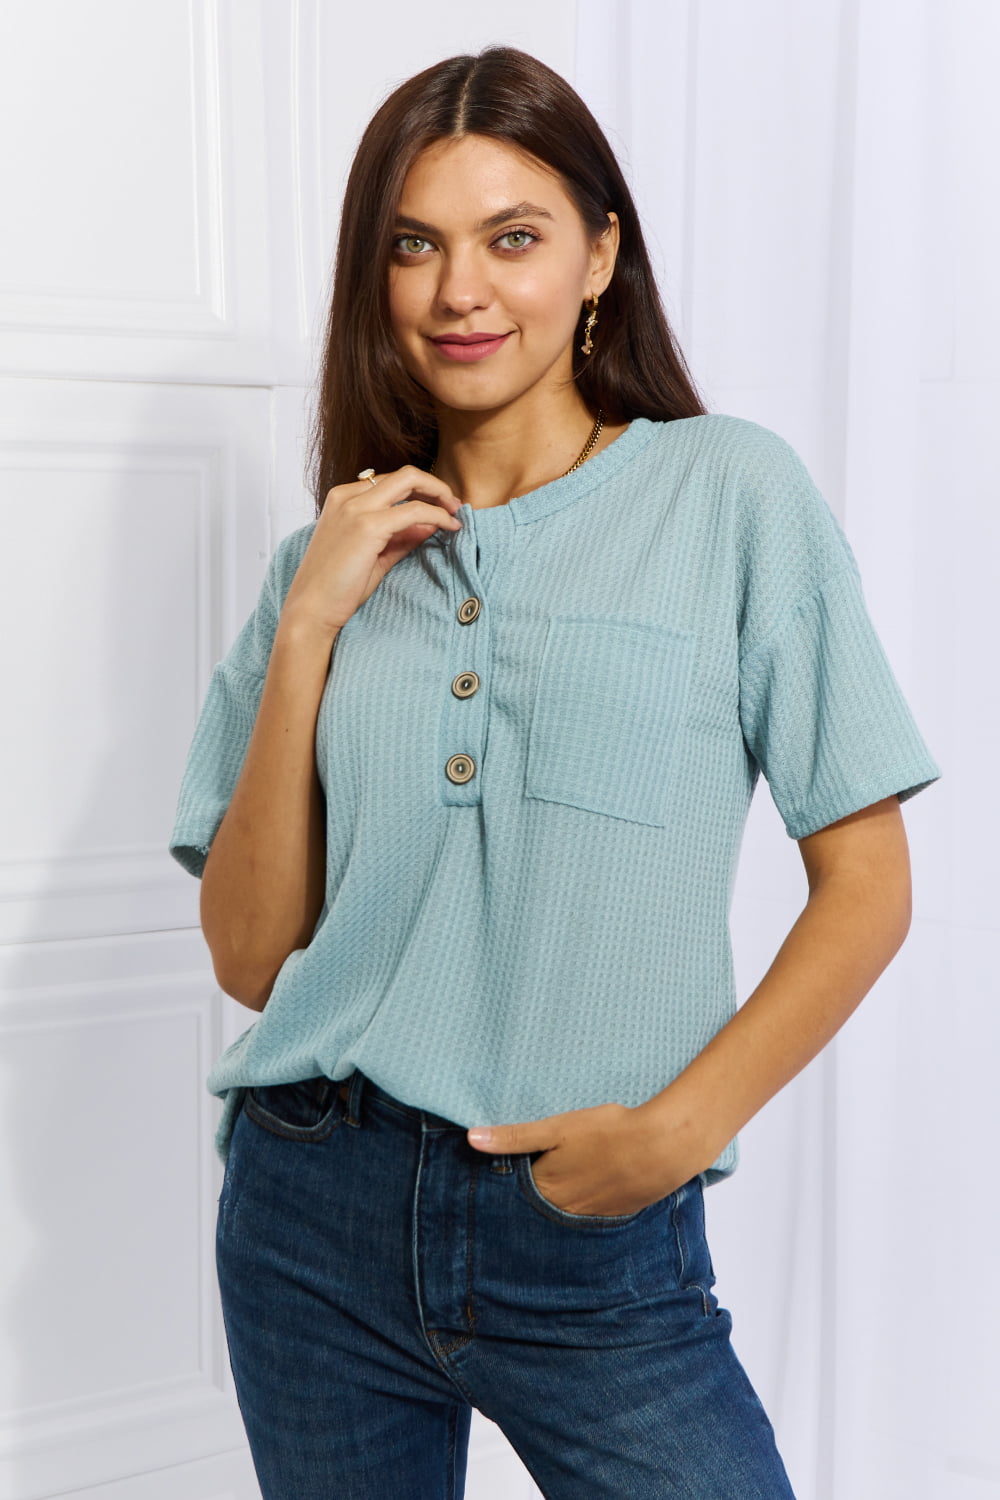 Made For You 1/4 Button Down Waffle Top in Blue